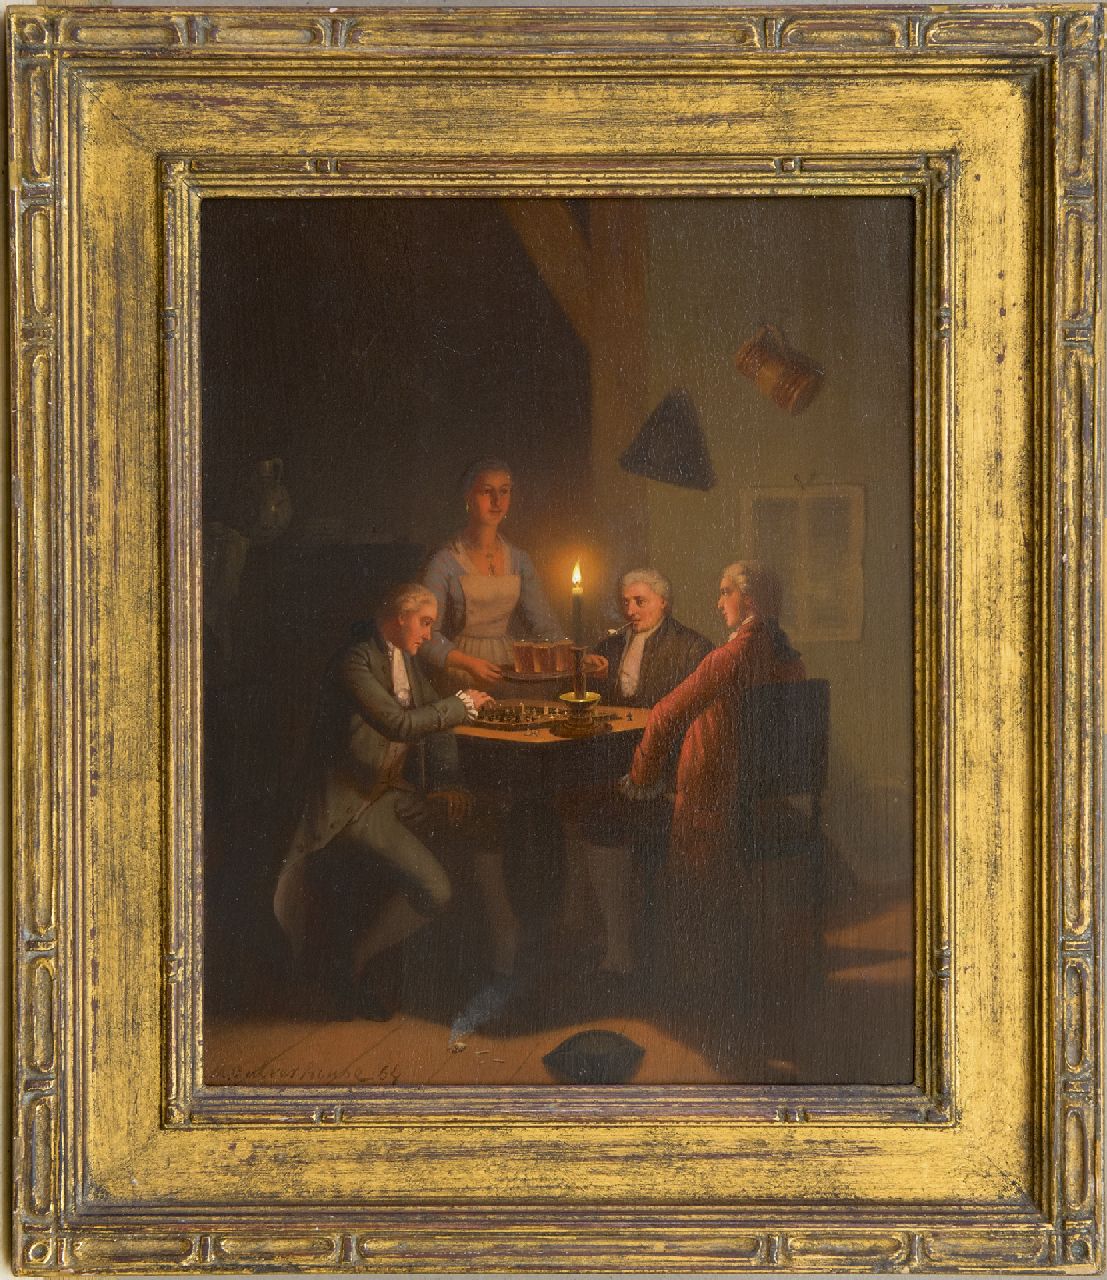 Culverhouse J.M.  | Johan Mengels Culverhouse | Paintings offered for sale | Chess players by candle light, oil on panel 26.8 x 21.3 cm, signed l.l. and dated '64